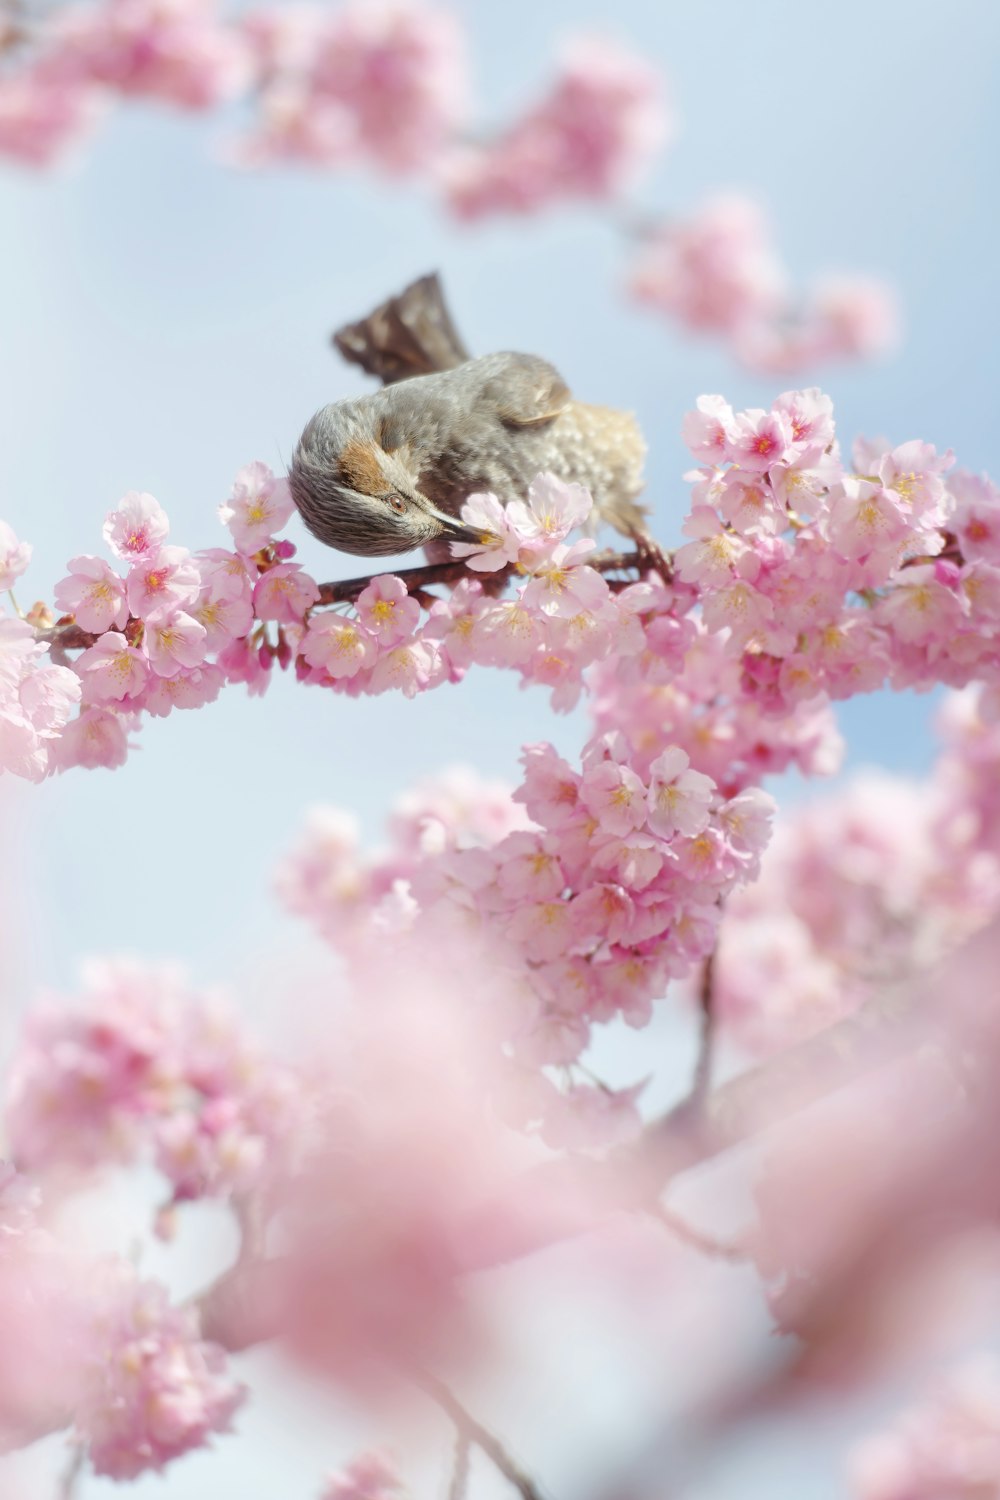 a bird sitting on a branch with pink flowers